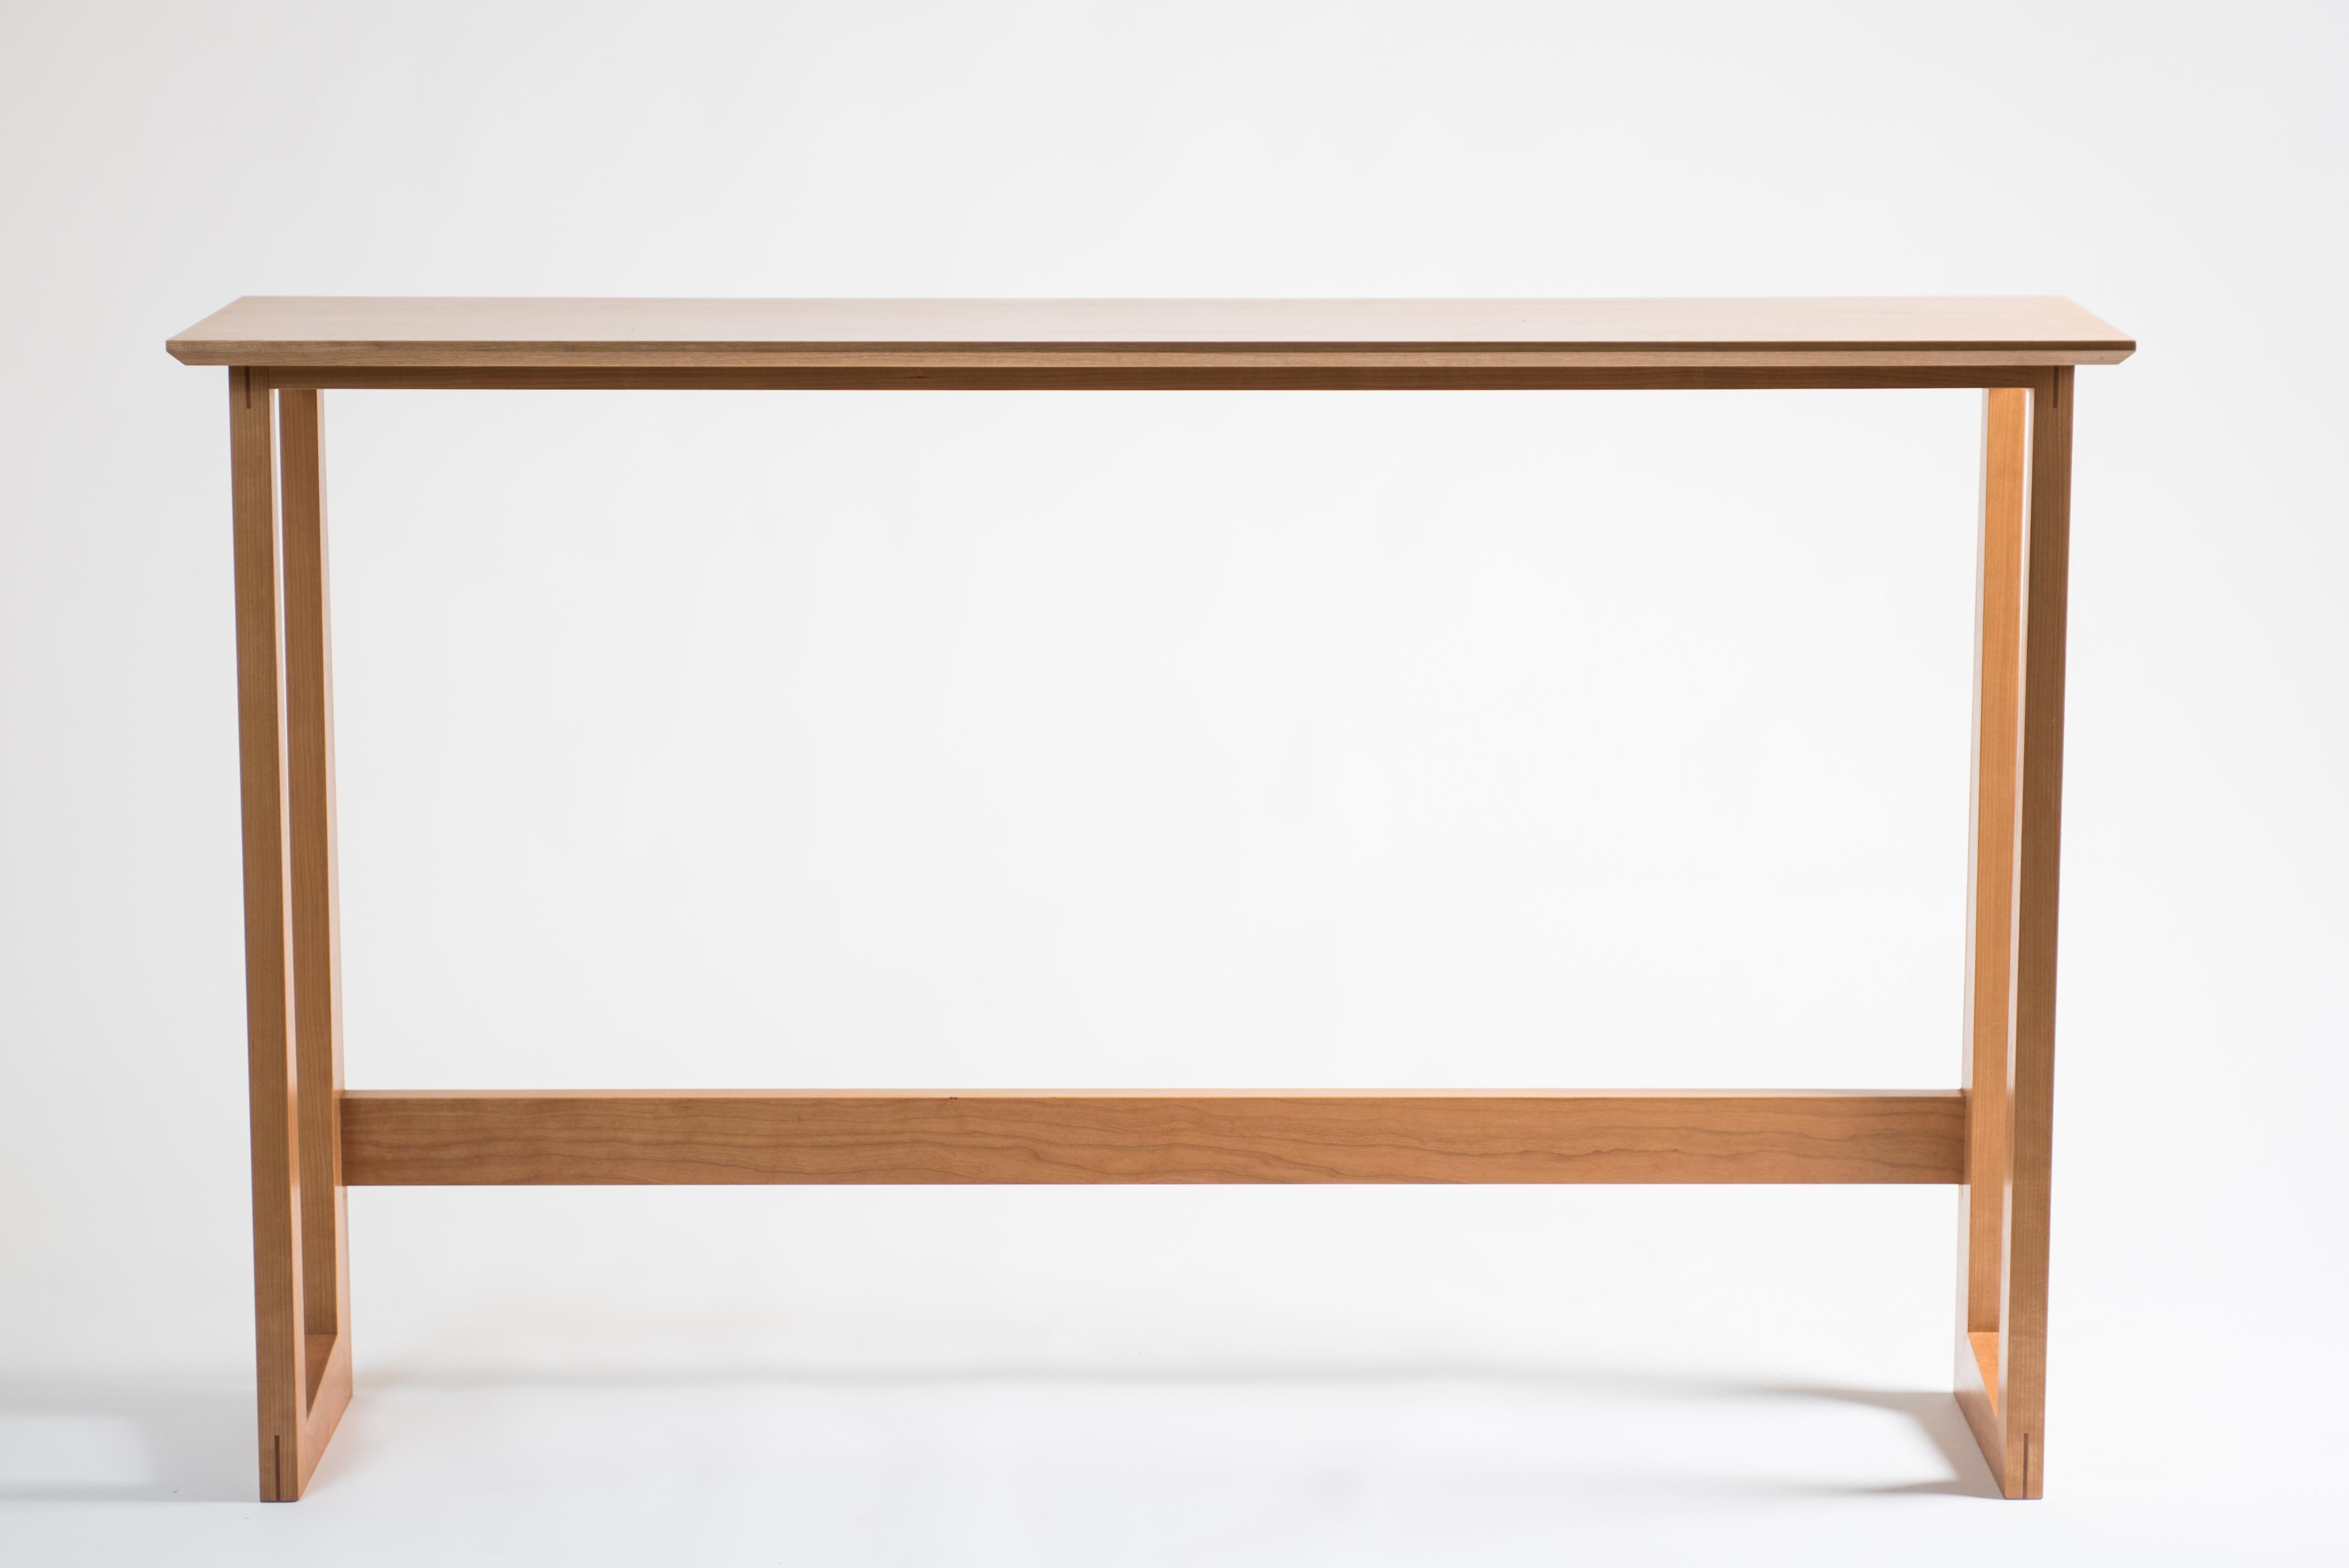 The Westport Pub table is a simple, sturdy table that would sit well in a house or apartment, as a standing desk behind a couch or as a breakfast bar by a kitchen window. The leg design plays on the traditional miter with varying angles and widths.